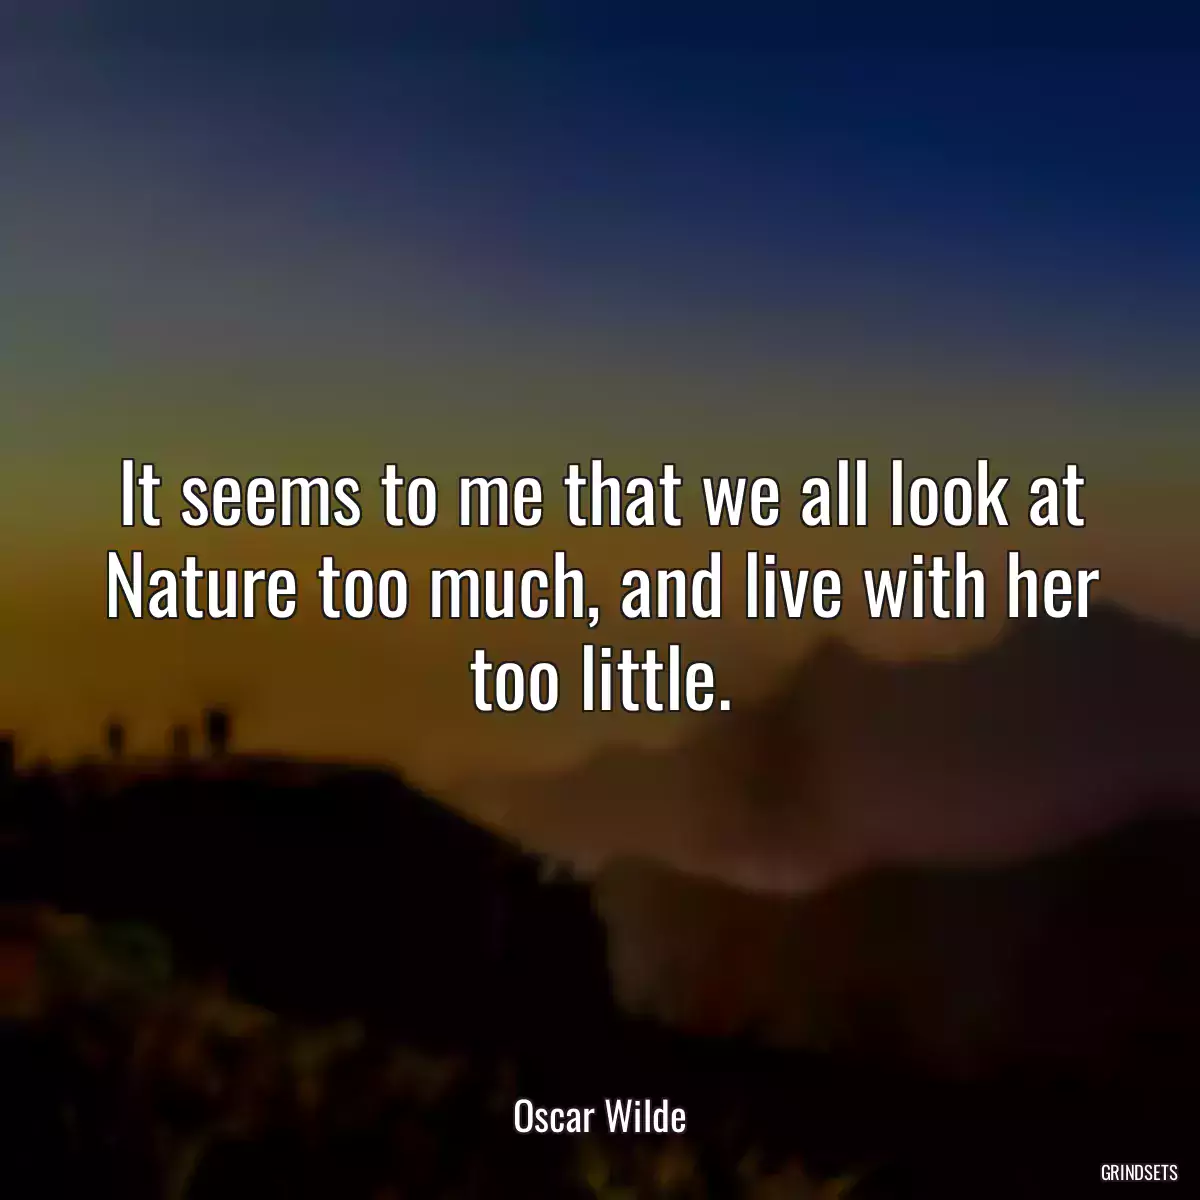 It seems to me that we all look at Nature too much, and live with her too little.